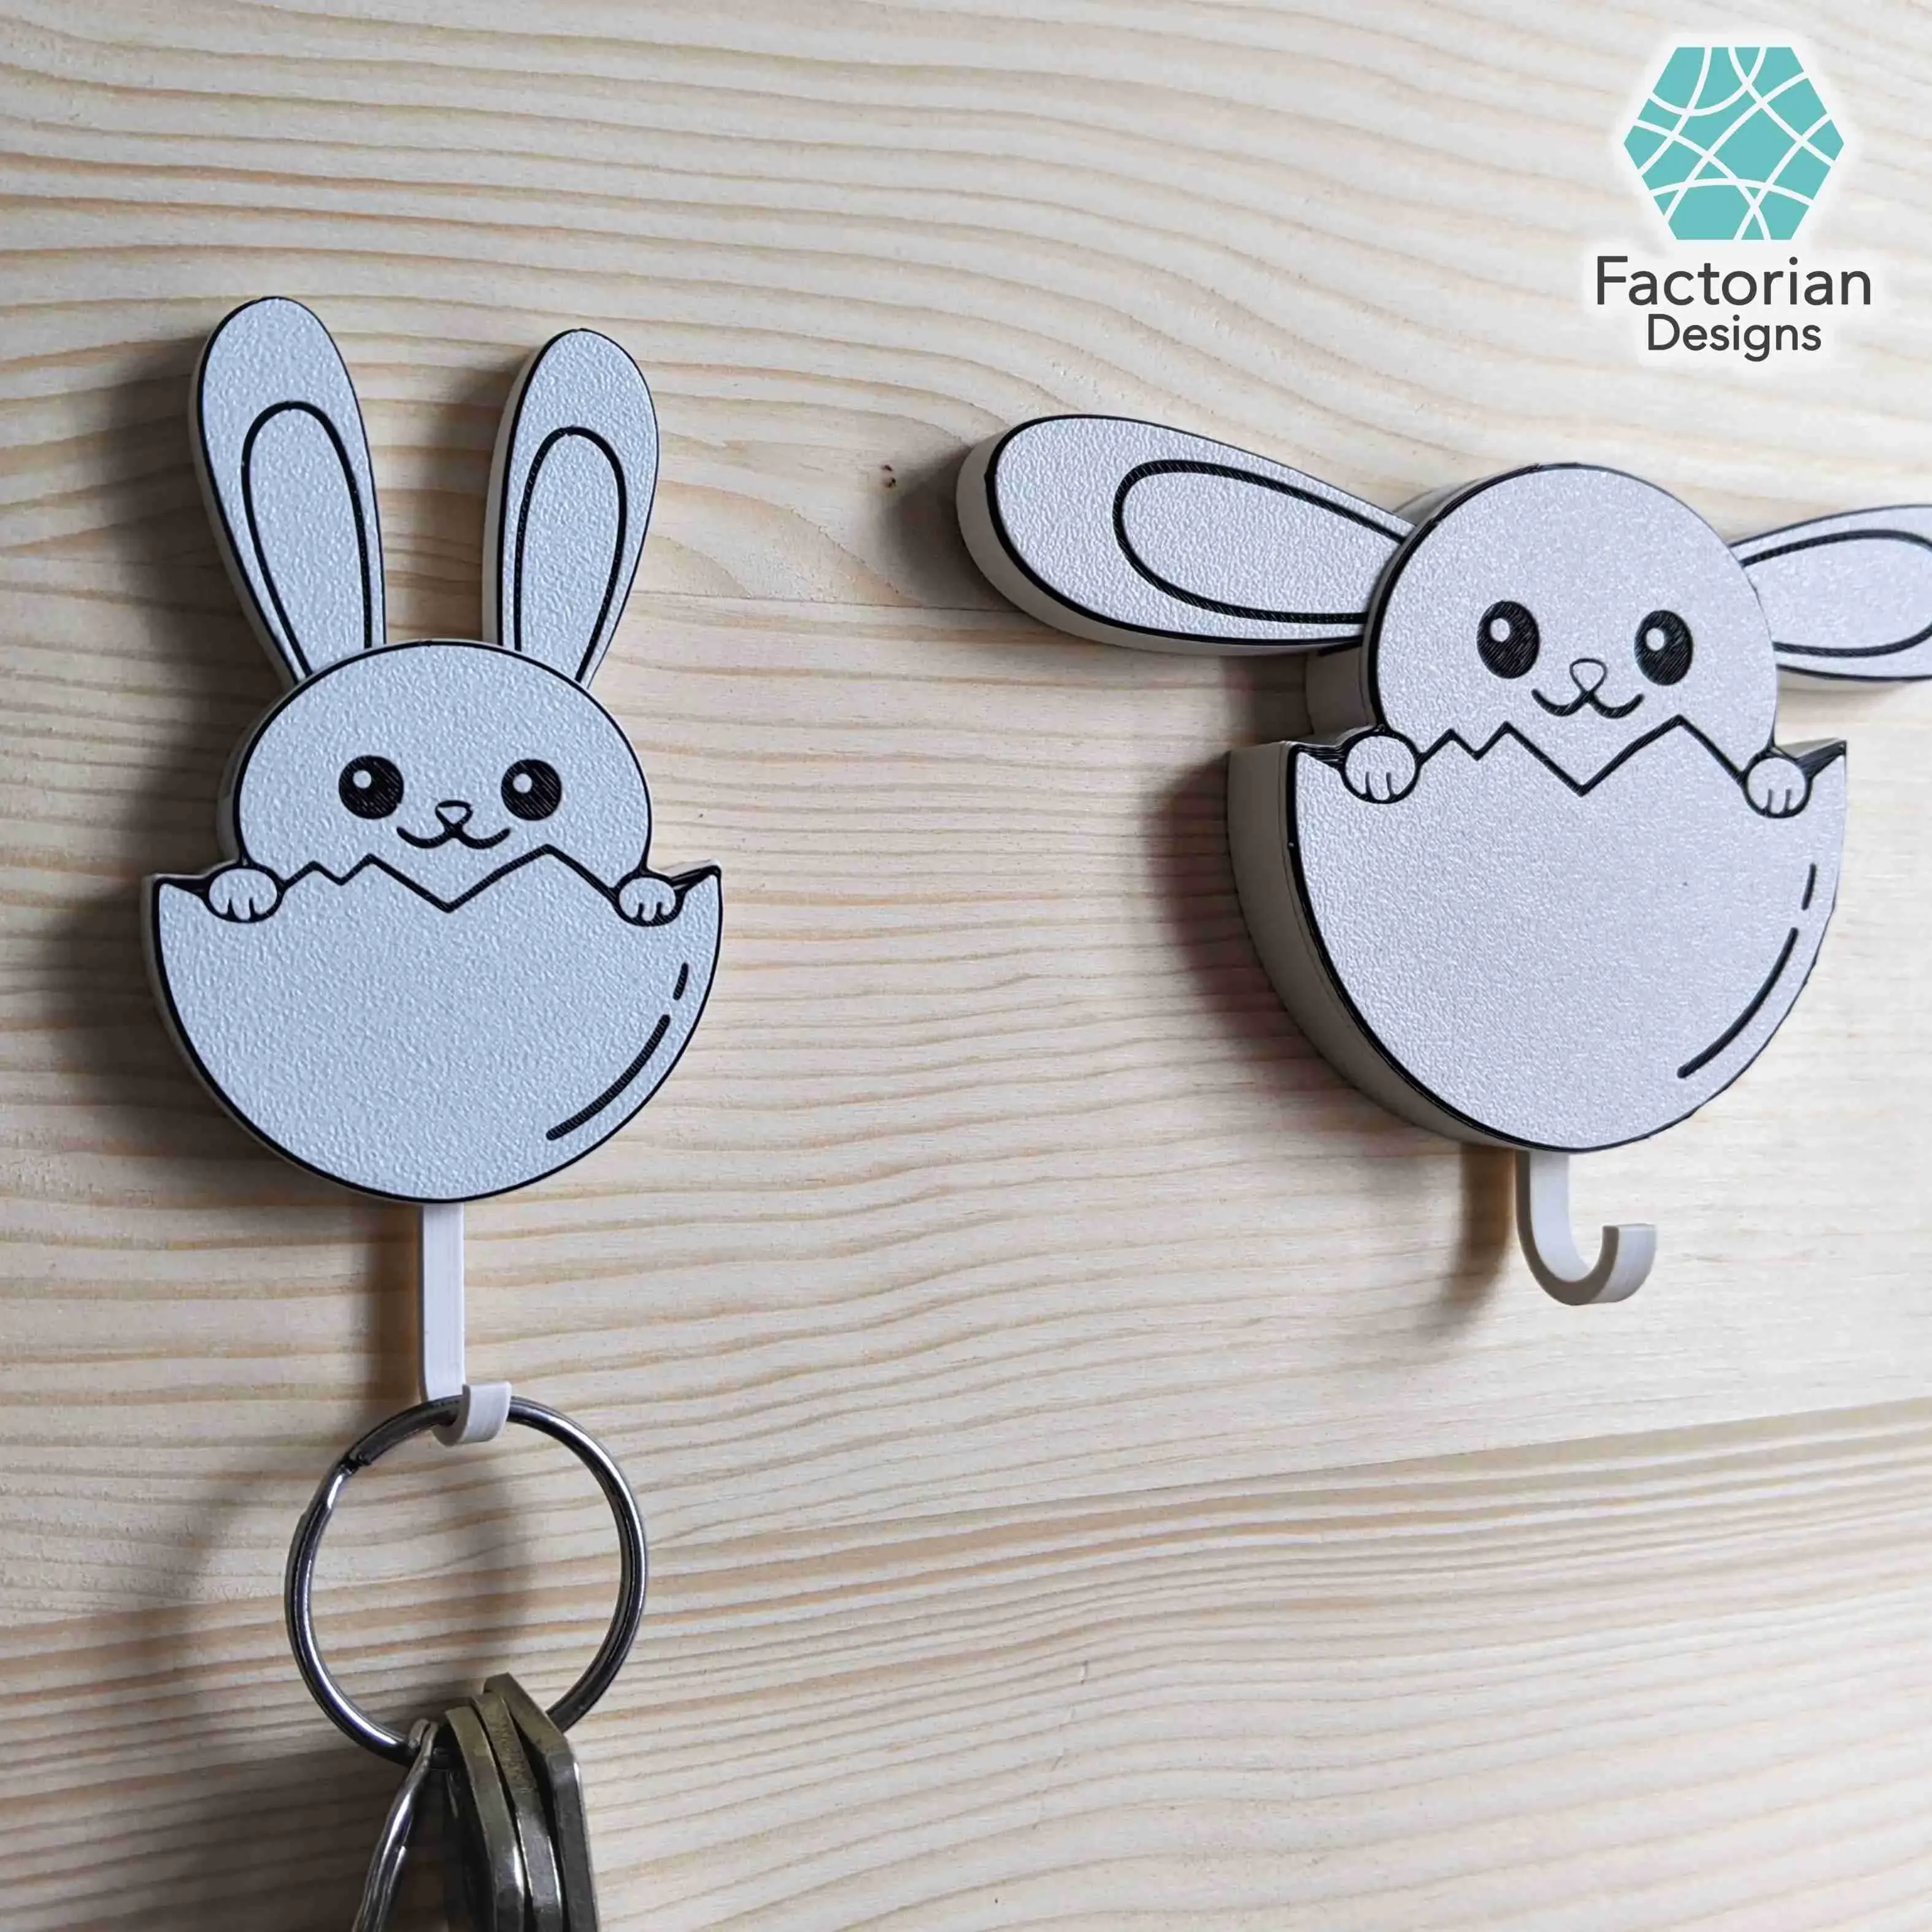 WALL KEY HOLDER - FUNNY AND CUTE BUNNEY KEY HANGER